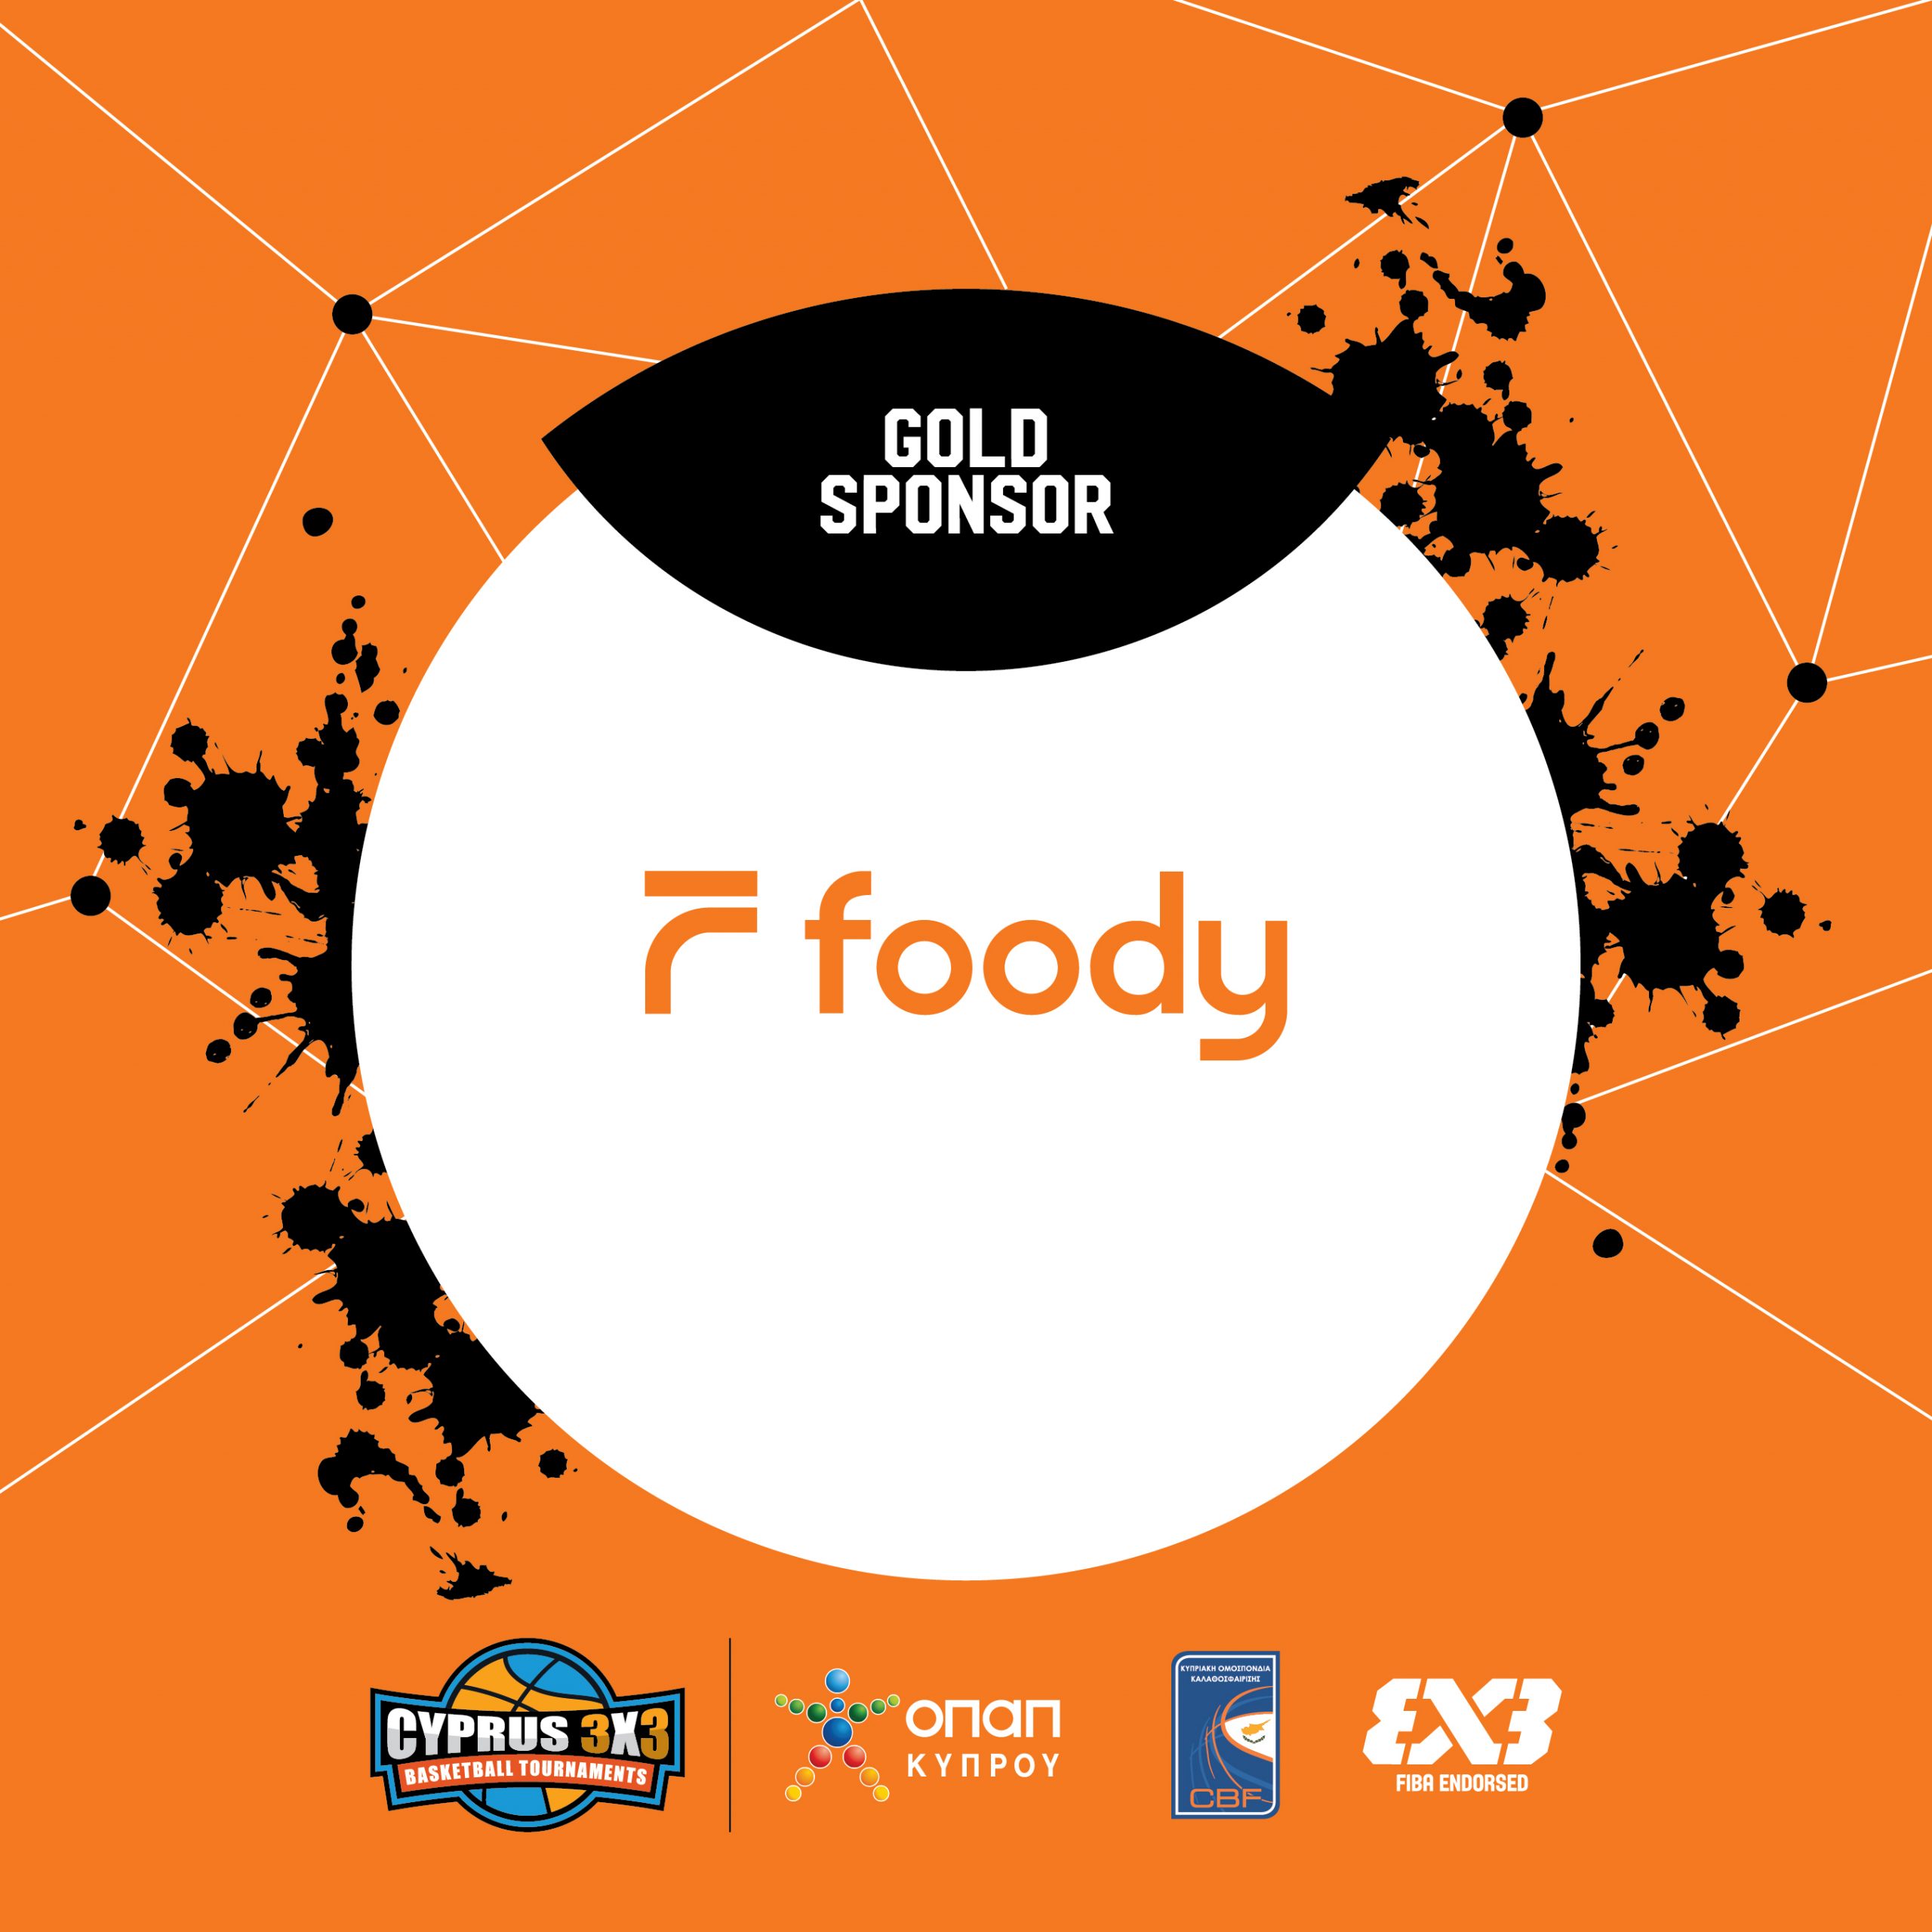 You are currently viewing Foody Supports Cyprus 3×3 as a Gold Sponsor